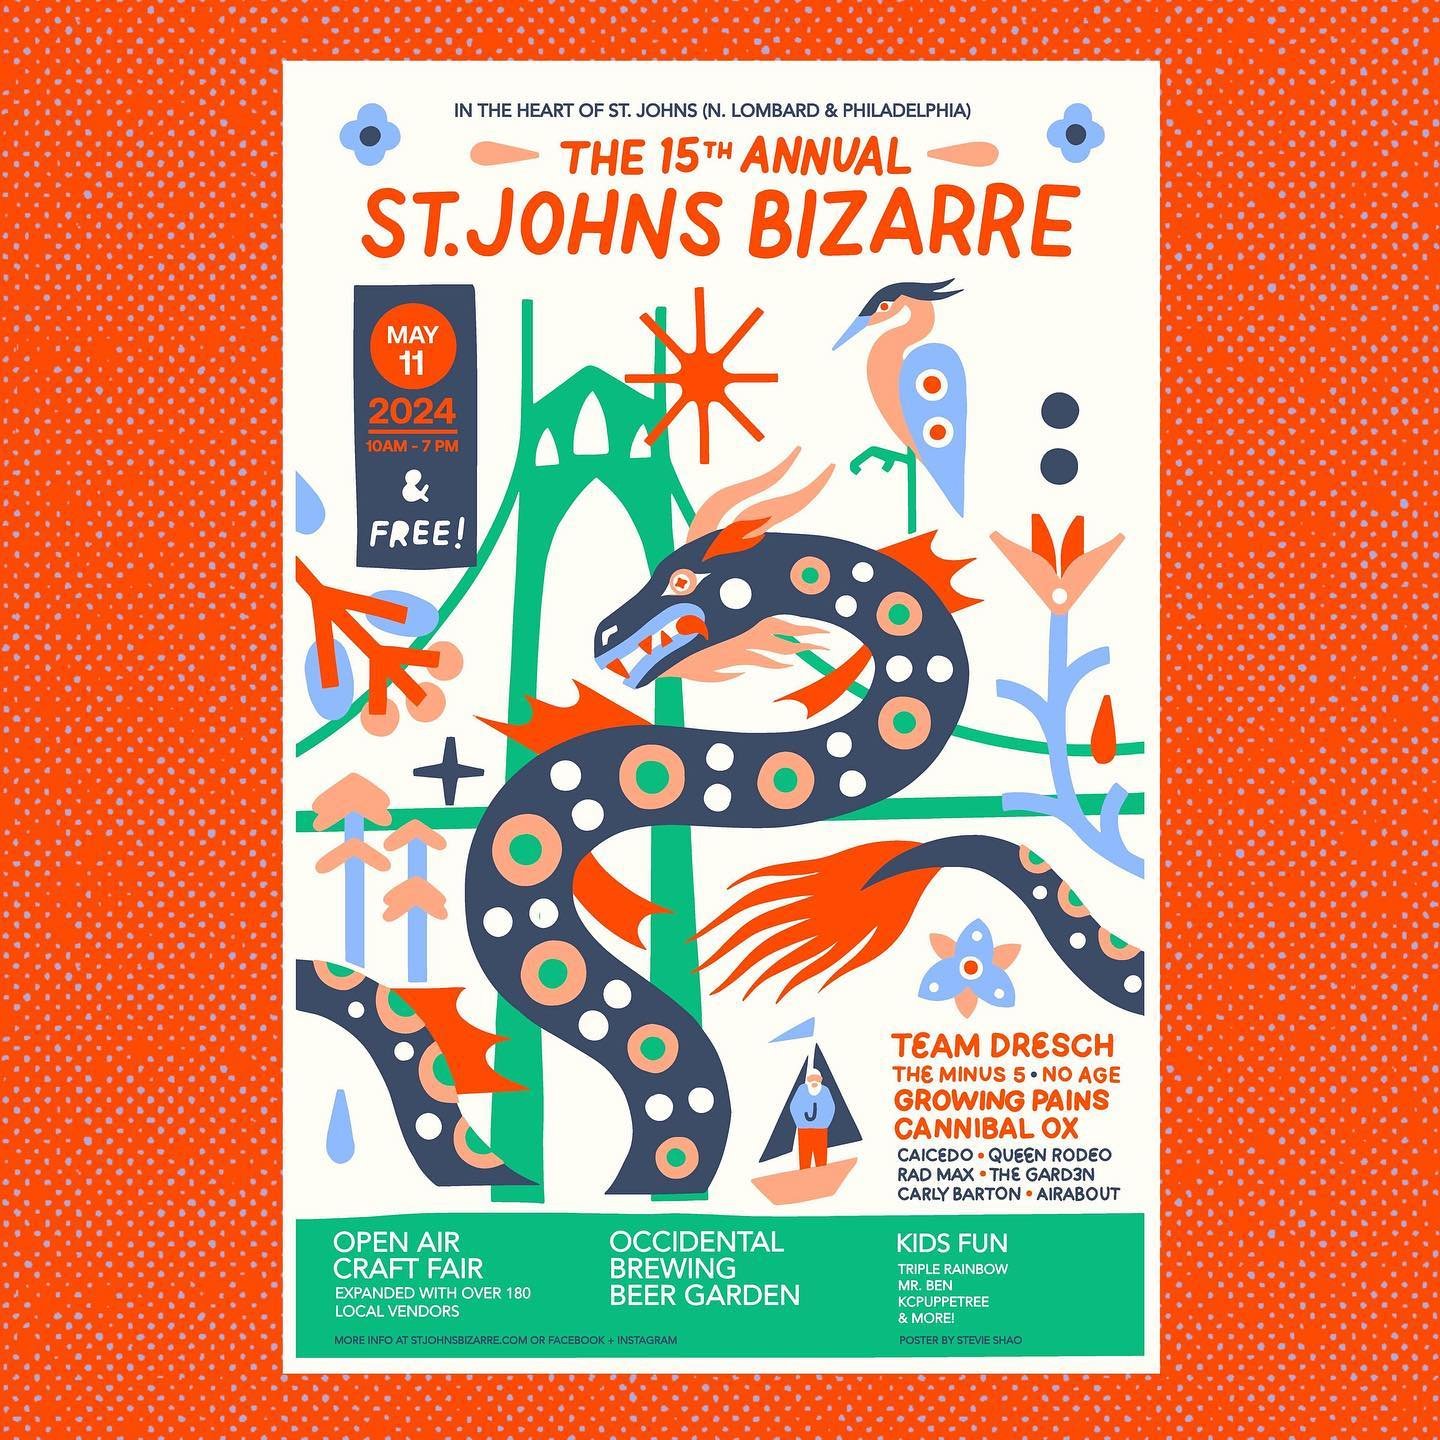 Come see me at St. johns Bizarre tomorrow! I am so excited to be returning this event for a second year. It was so much fun last year and it looks like tomorrow's weather is going to be perfect! This event includes local artists, music, food and acti